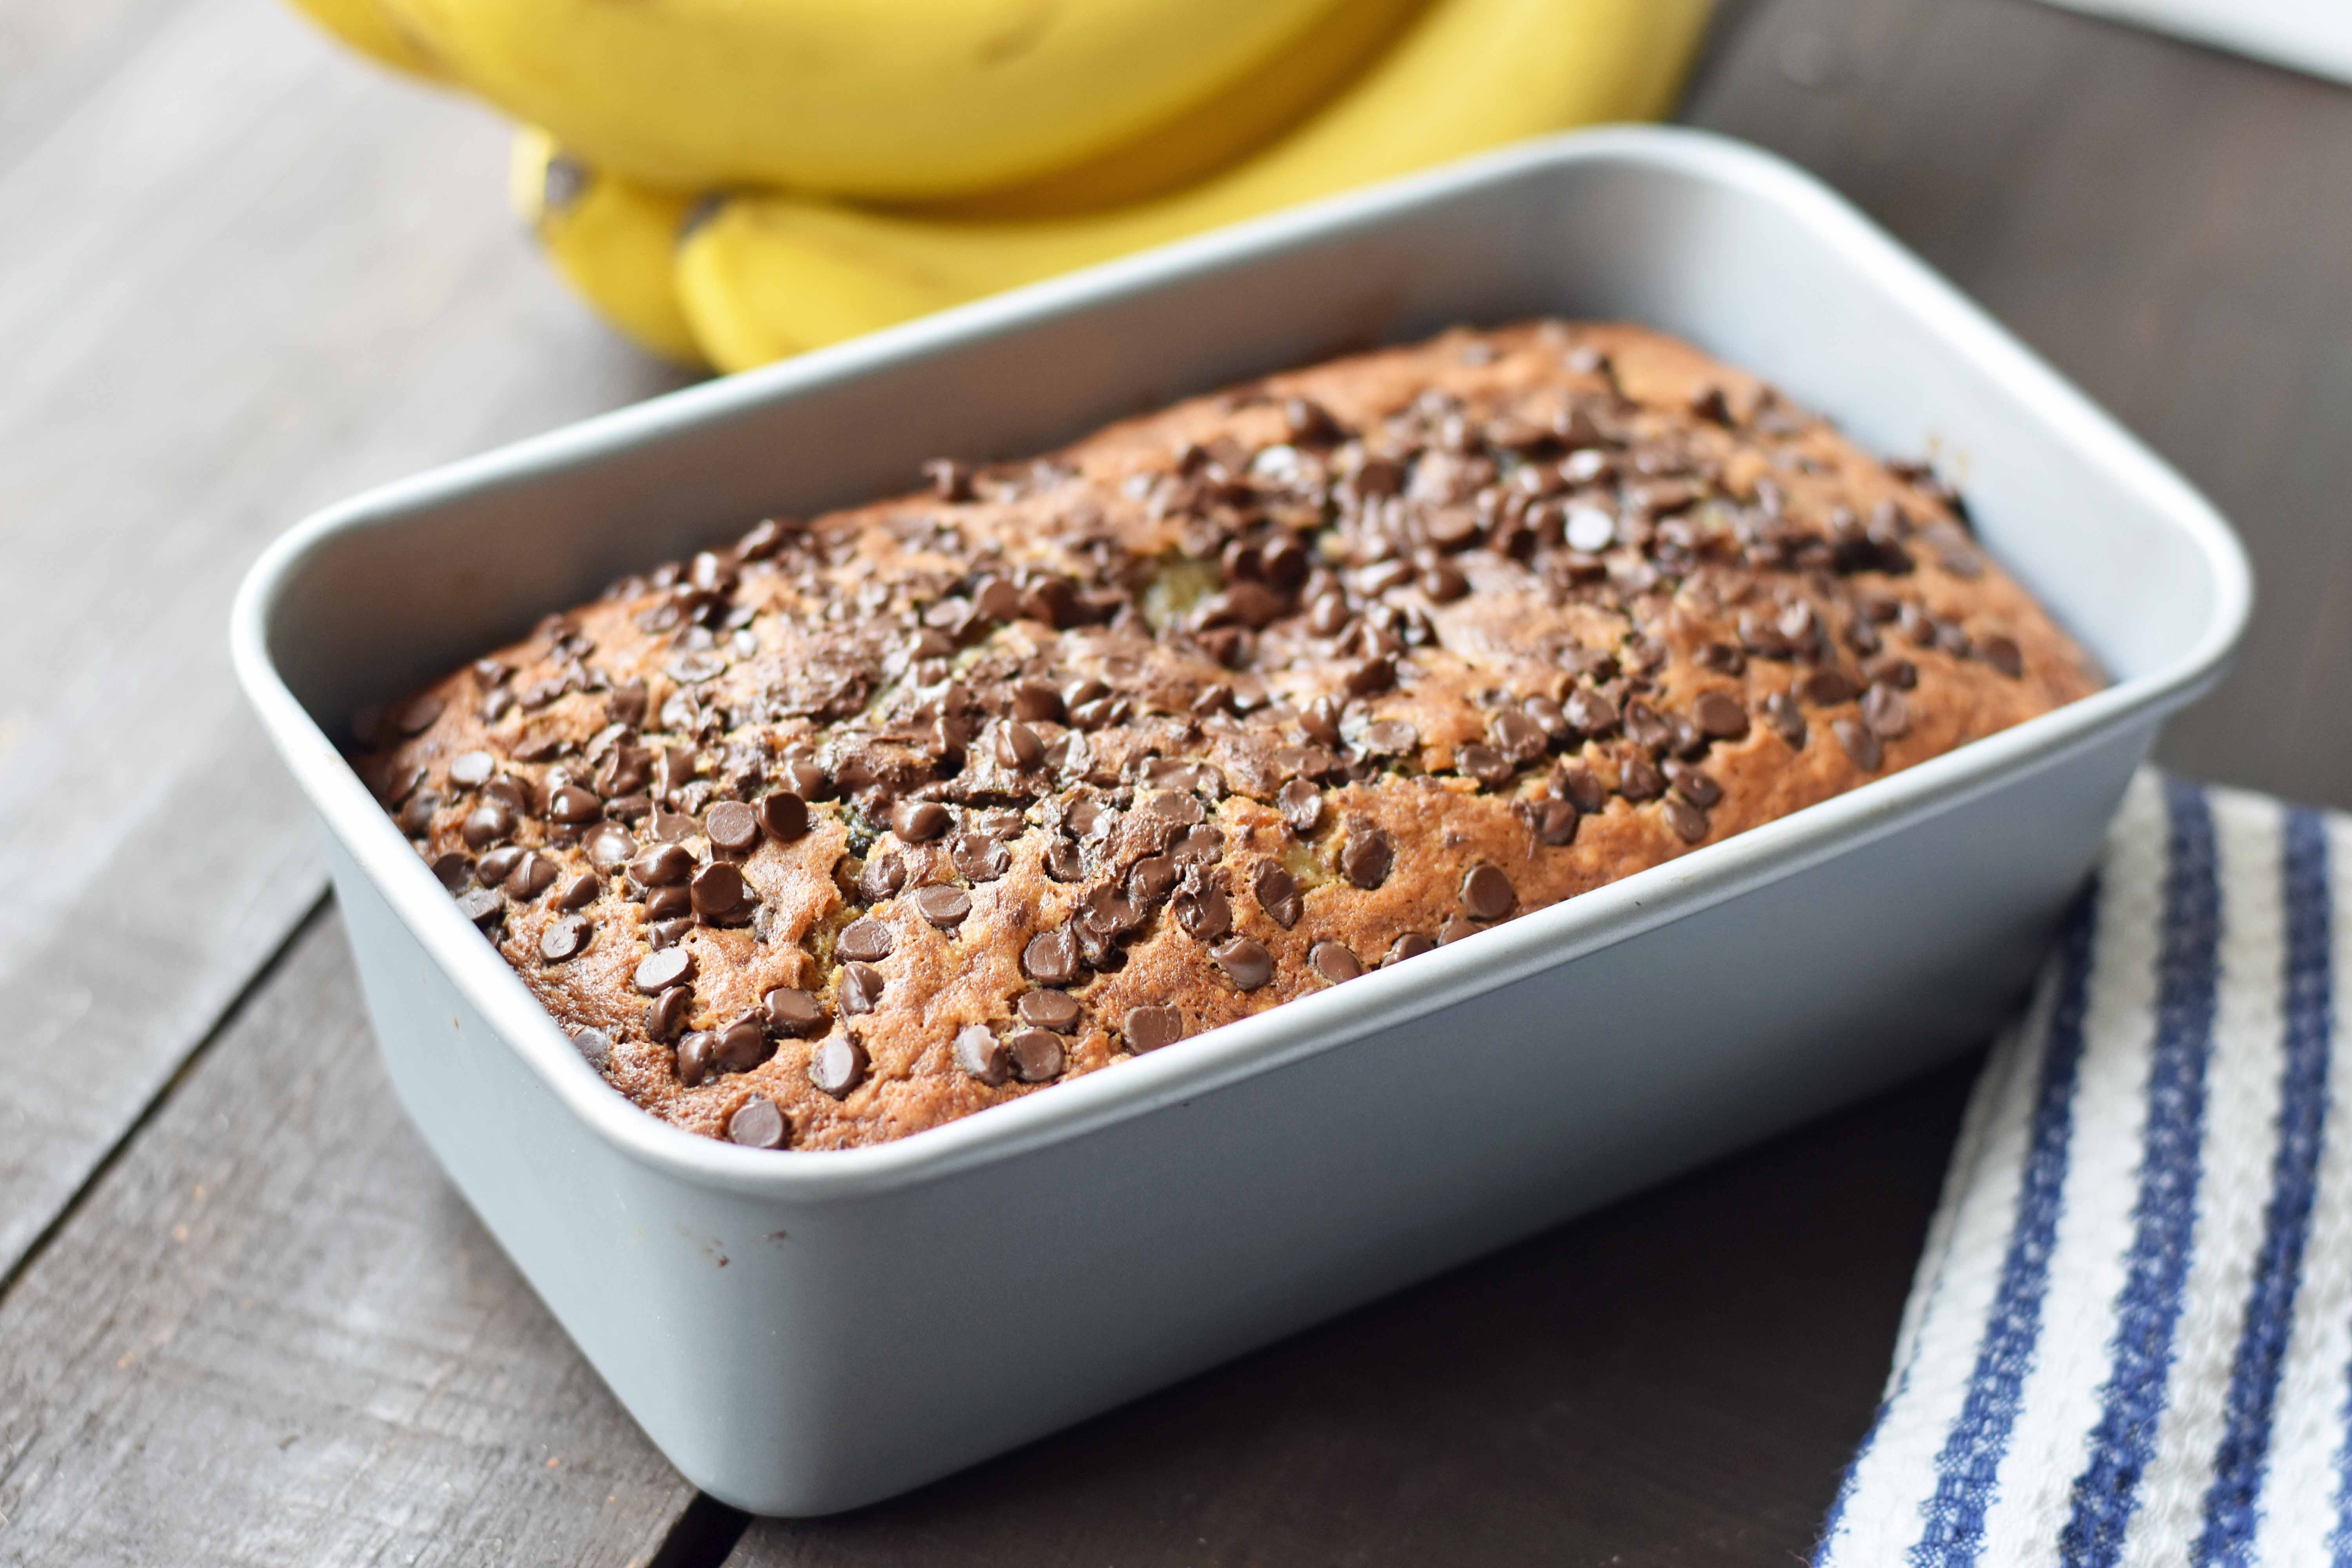 The best ever chocolate chip banana bread. Moist and delicious banana bread with chocolate chips. Banana bread made with butter, oil, and sour cream to create a perfect banana bread. www.modernhoney.com